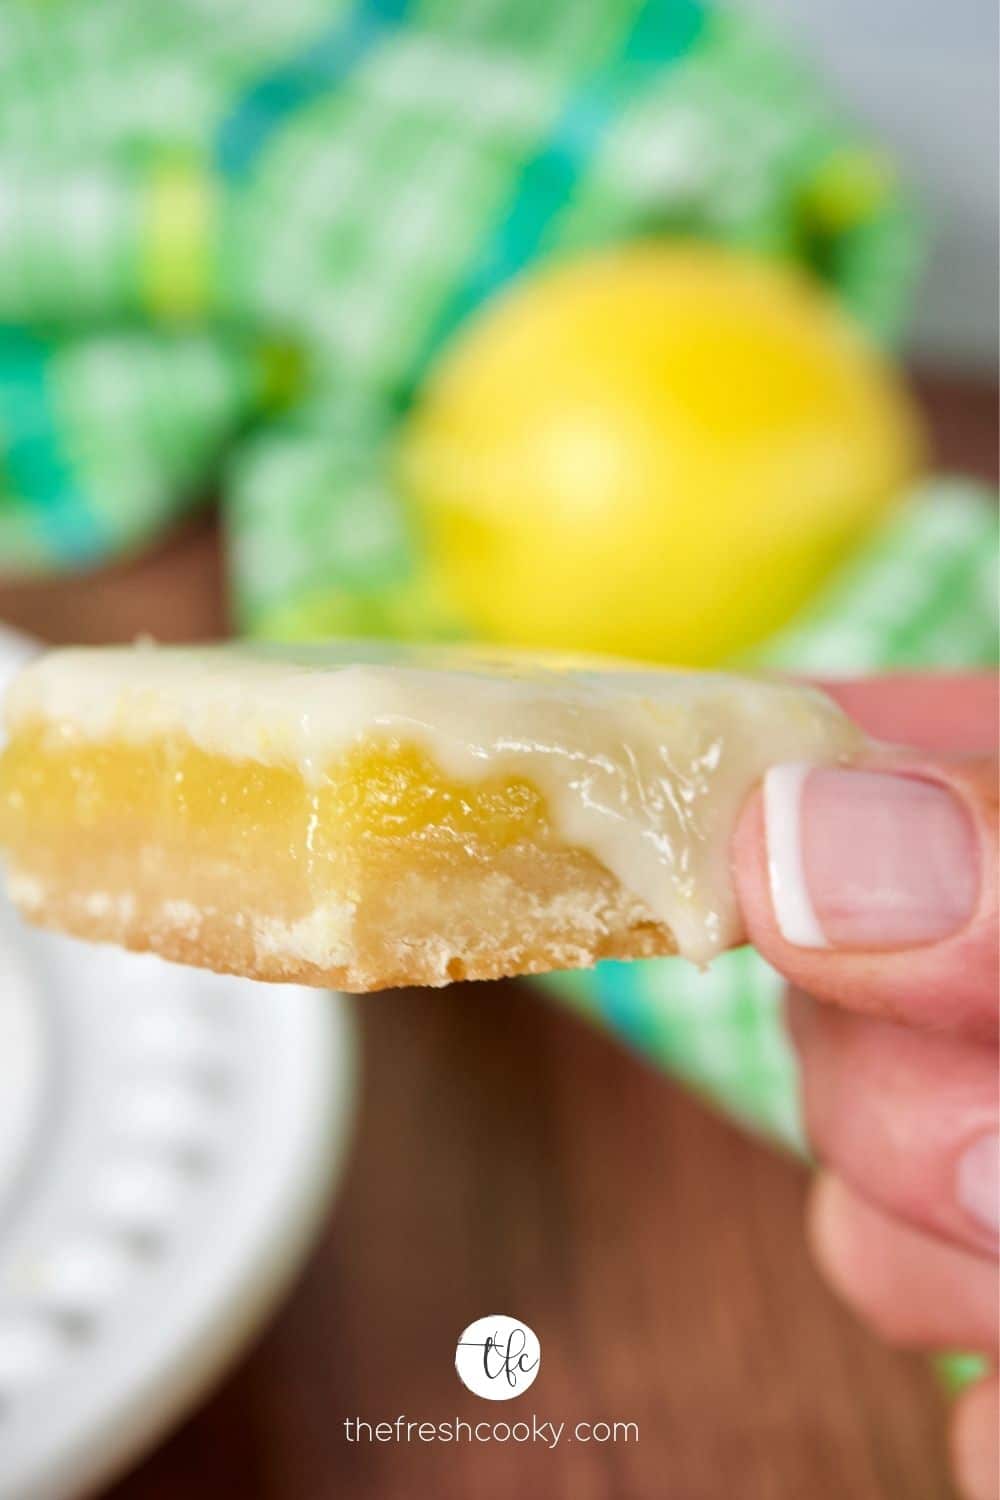 Hand holding an old fashioned lemon square dripping with fresh lemon glaze.